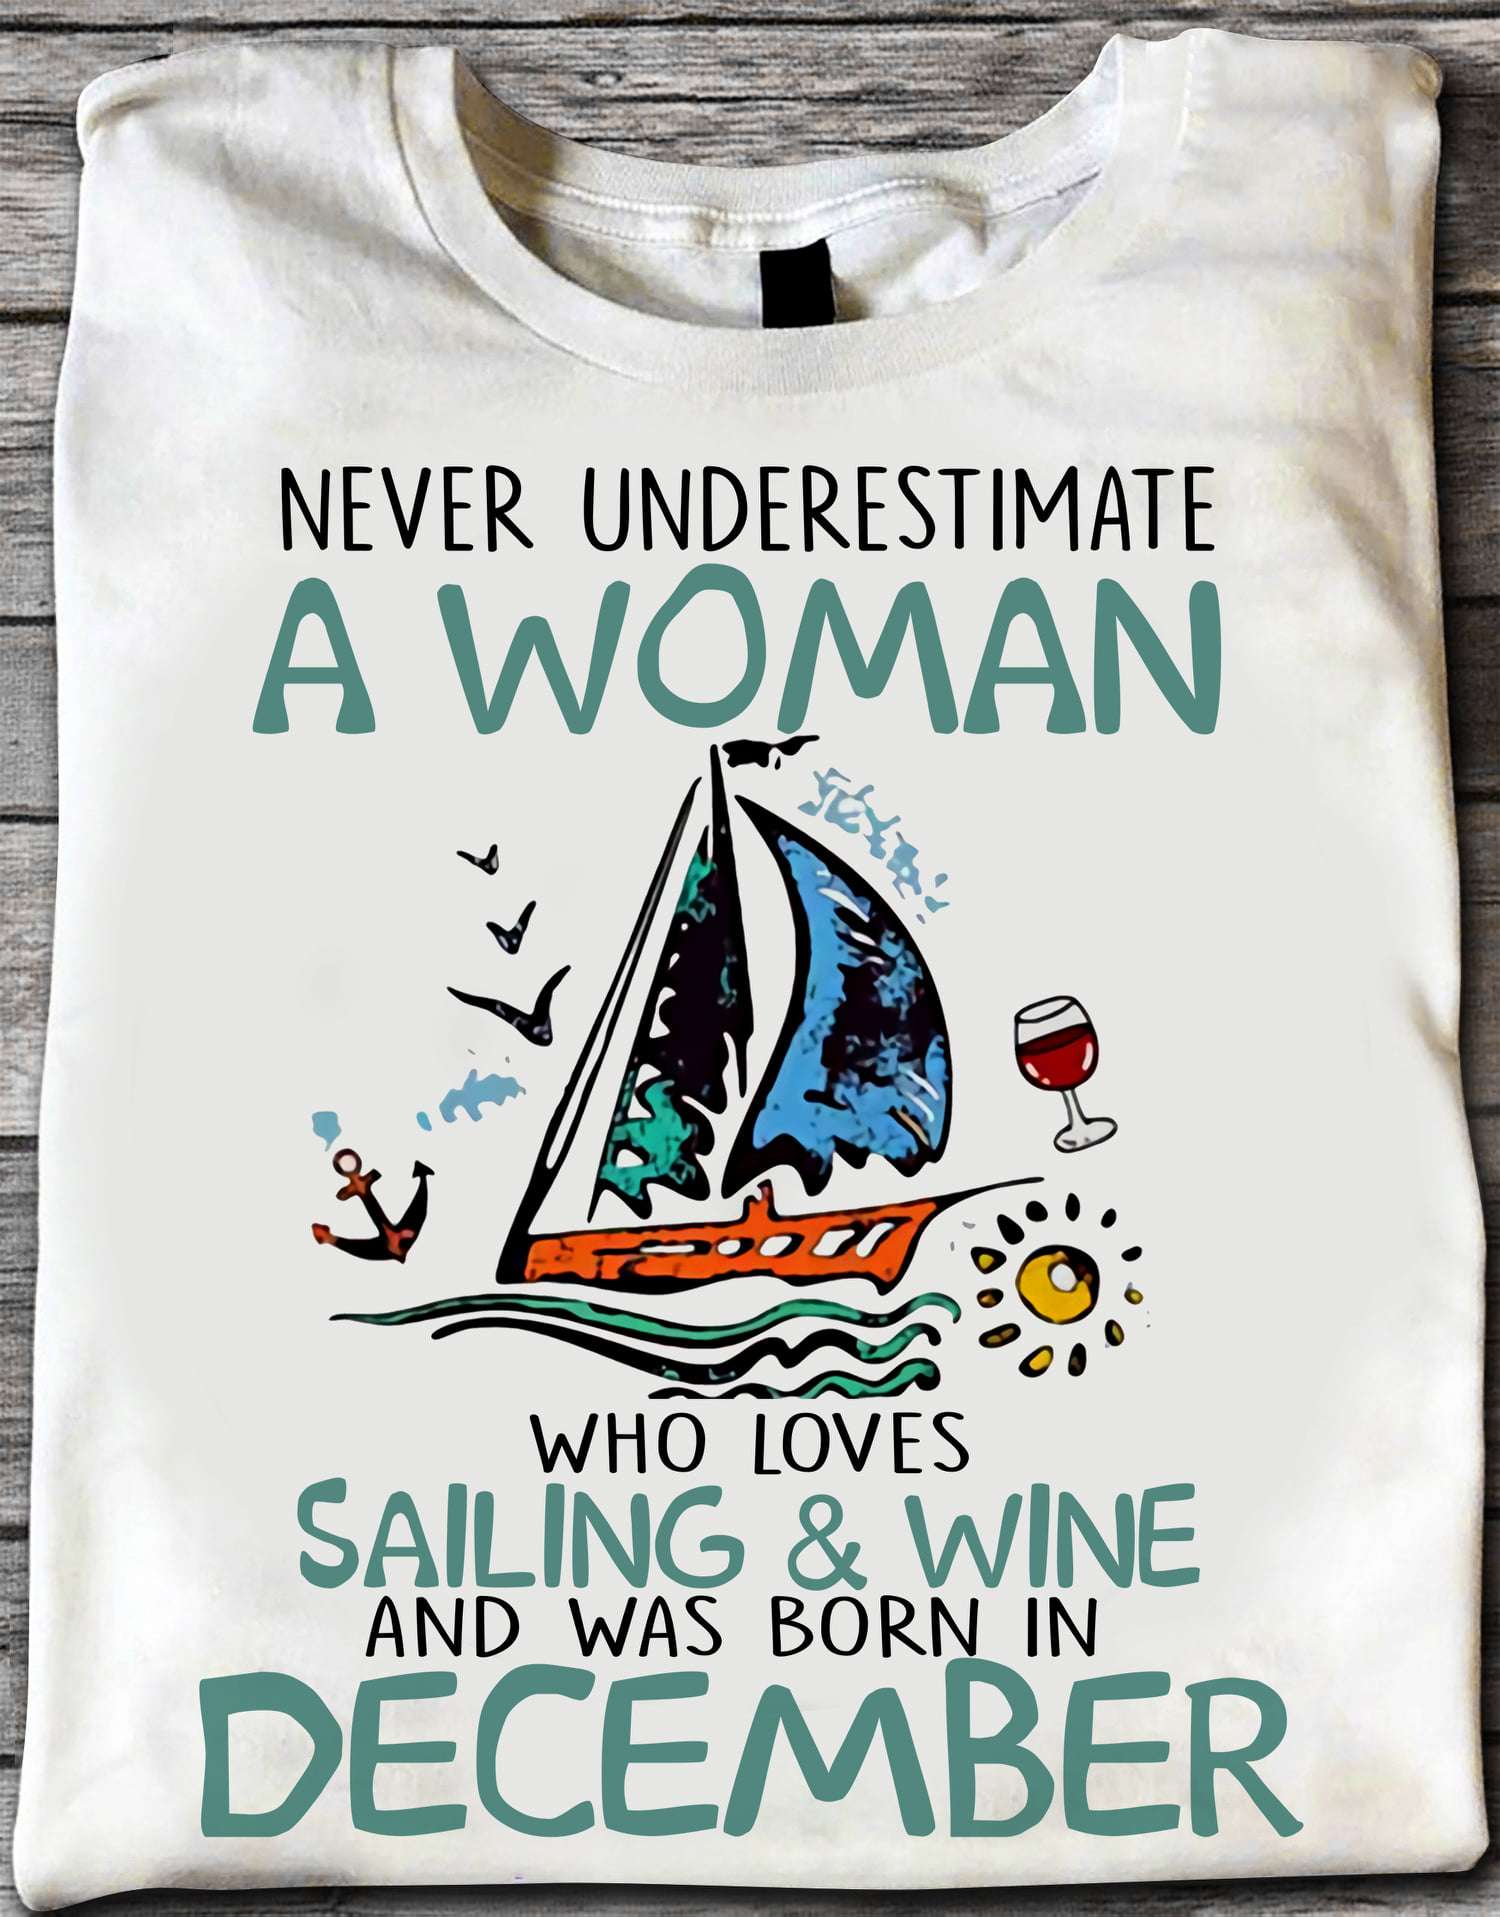 Never underestimate a woman who loves sailing and wine and was born in December - Woman go sailing